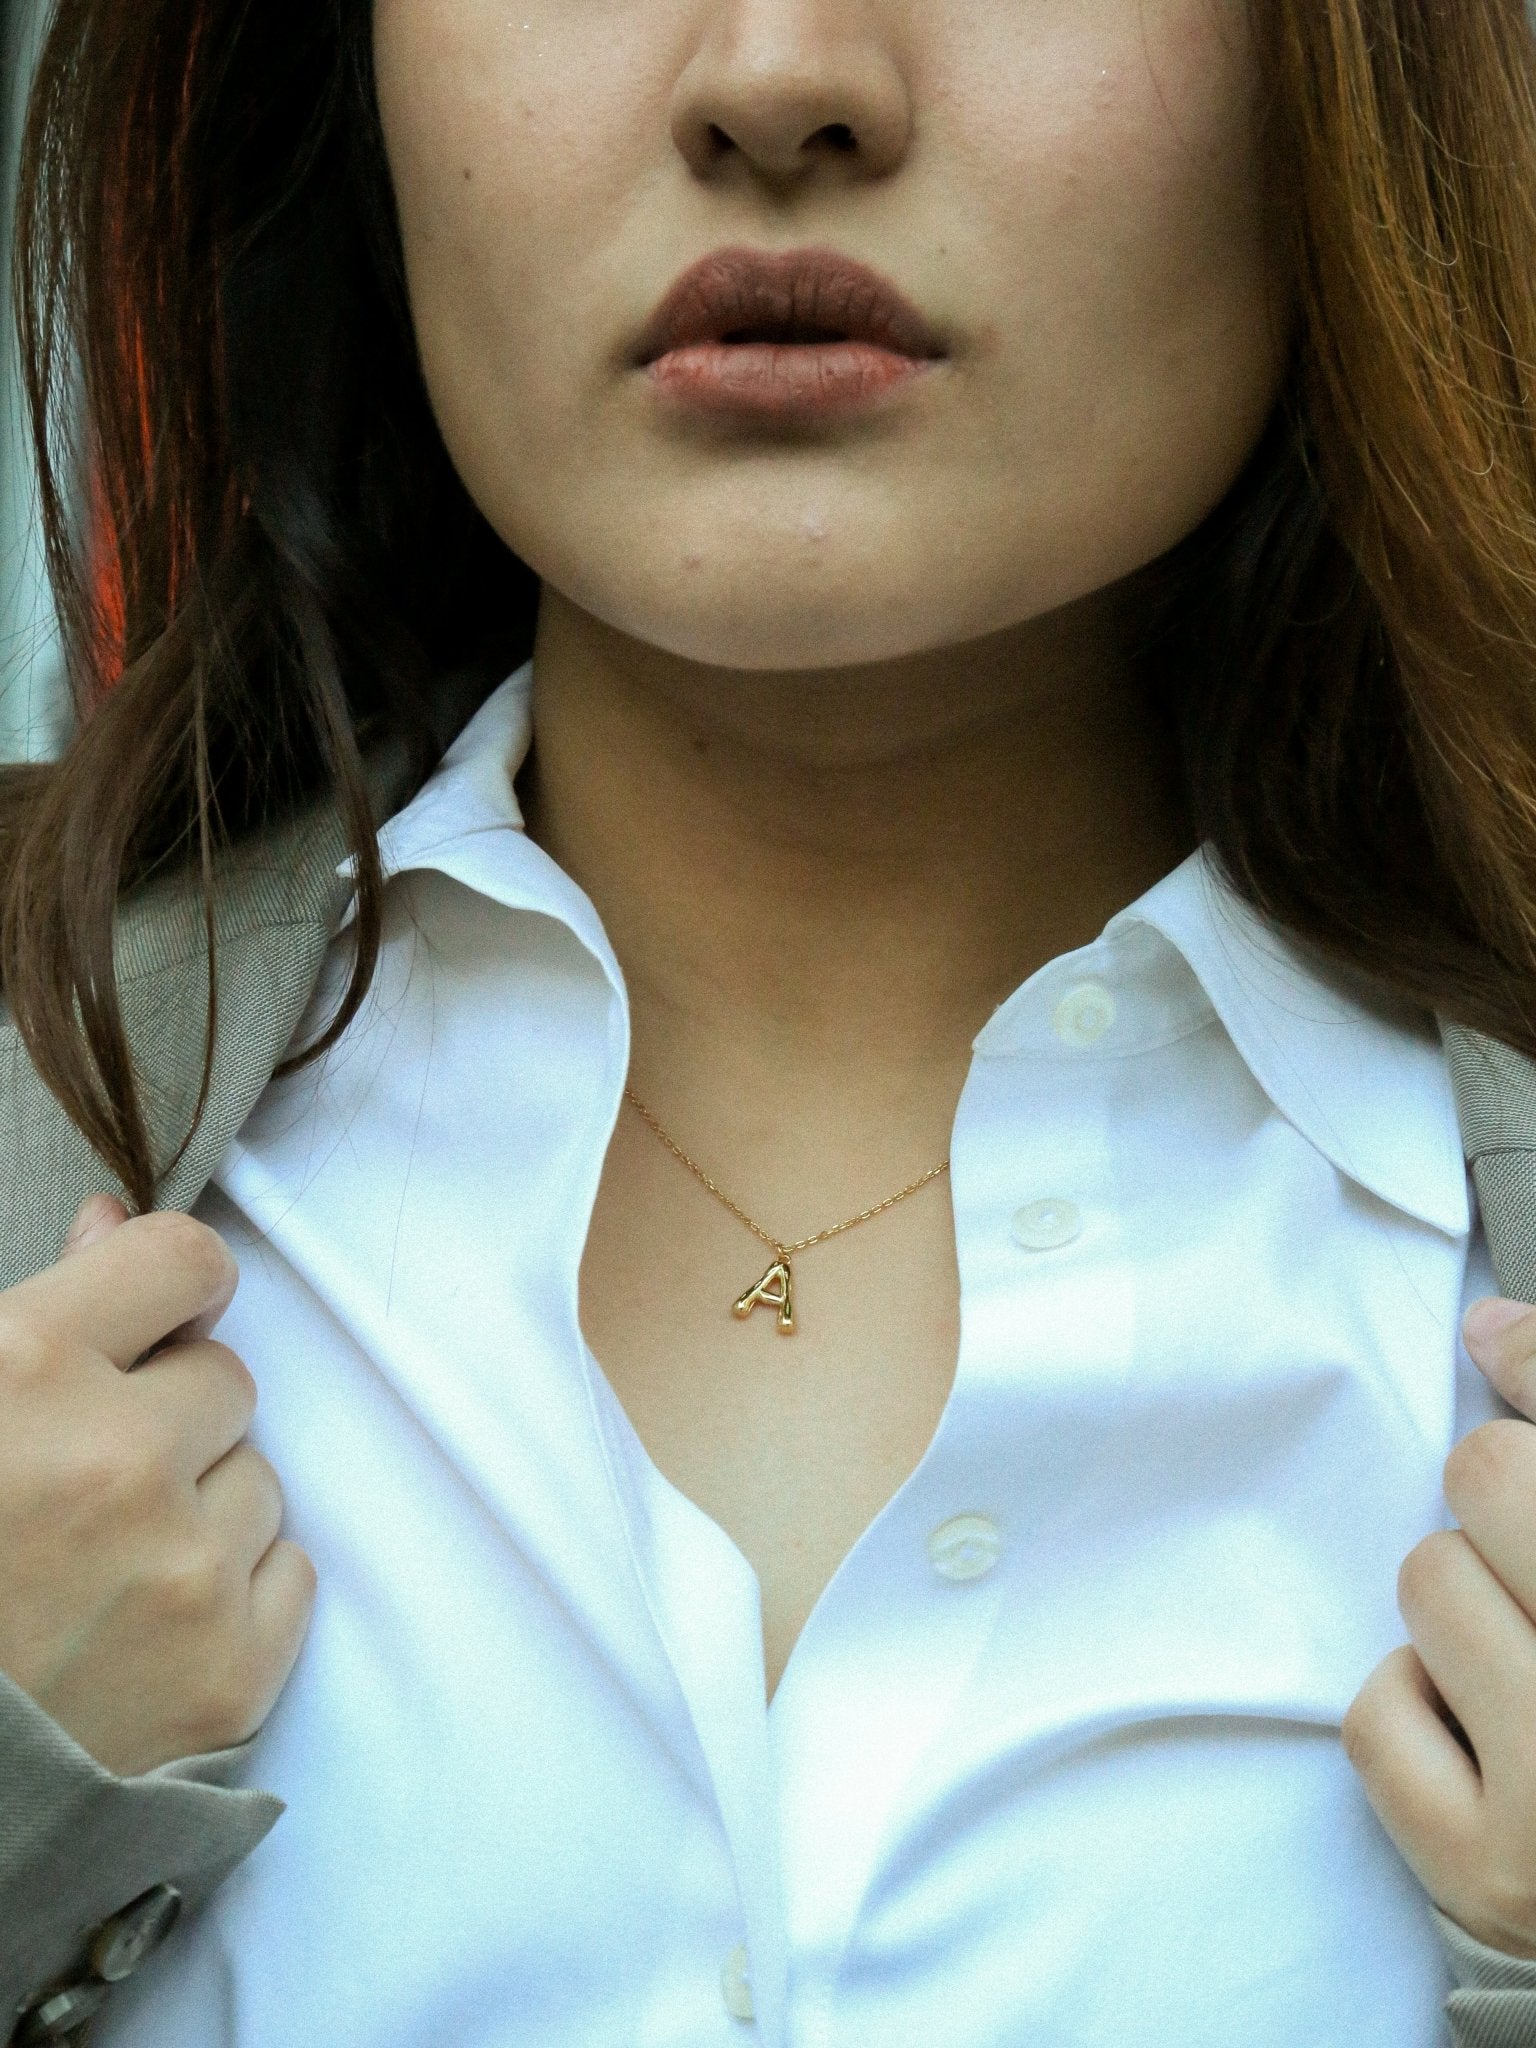 Bamboo Initial Necklace - Oia Boutique